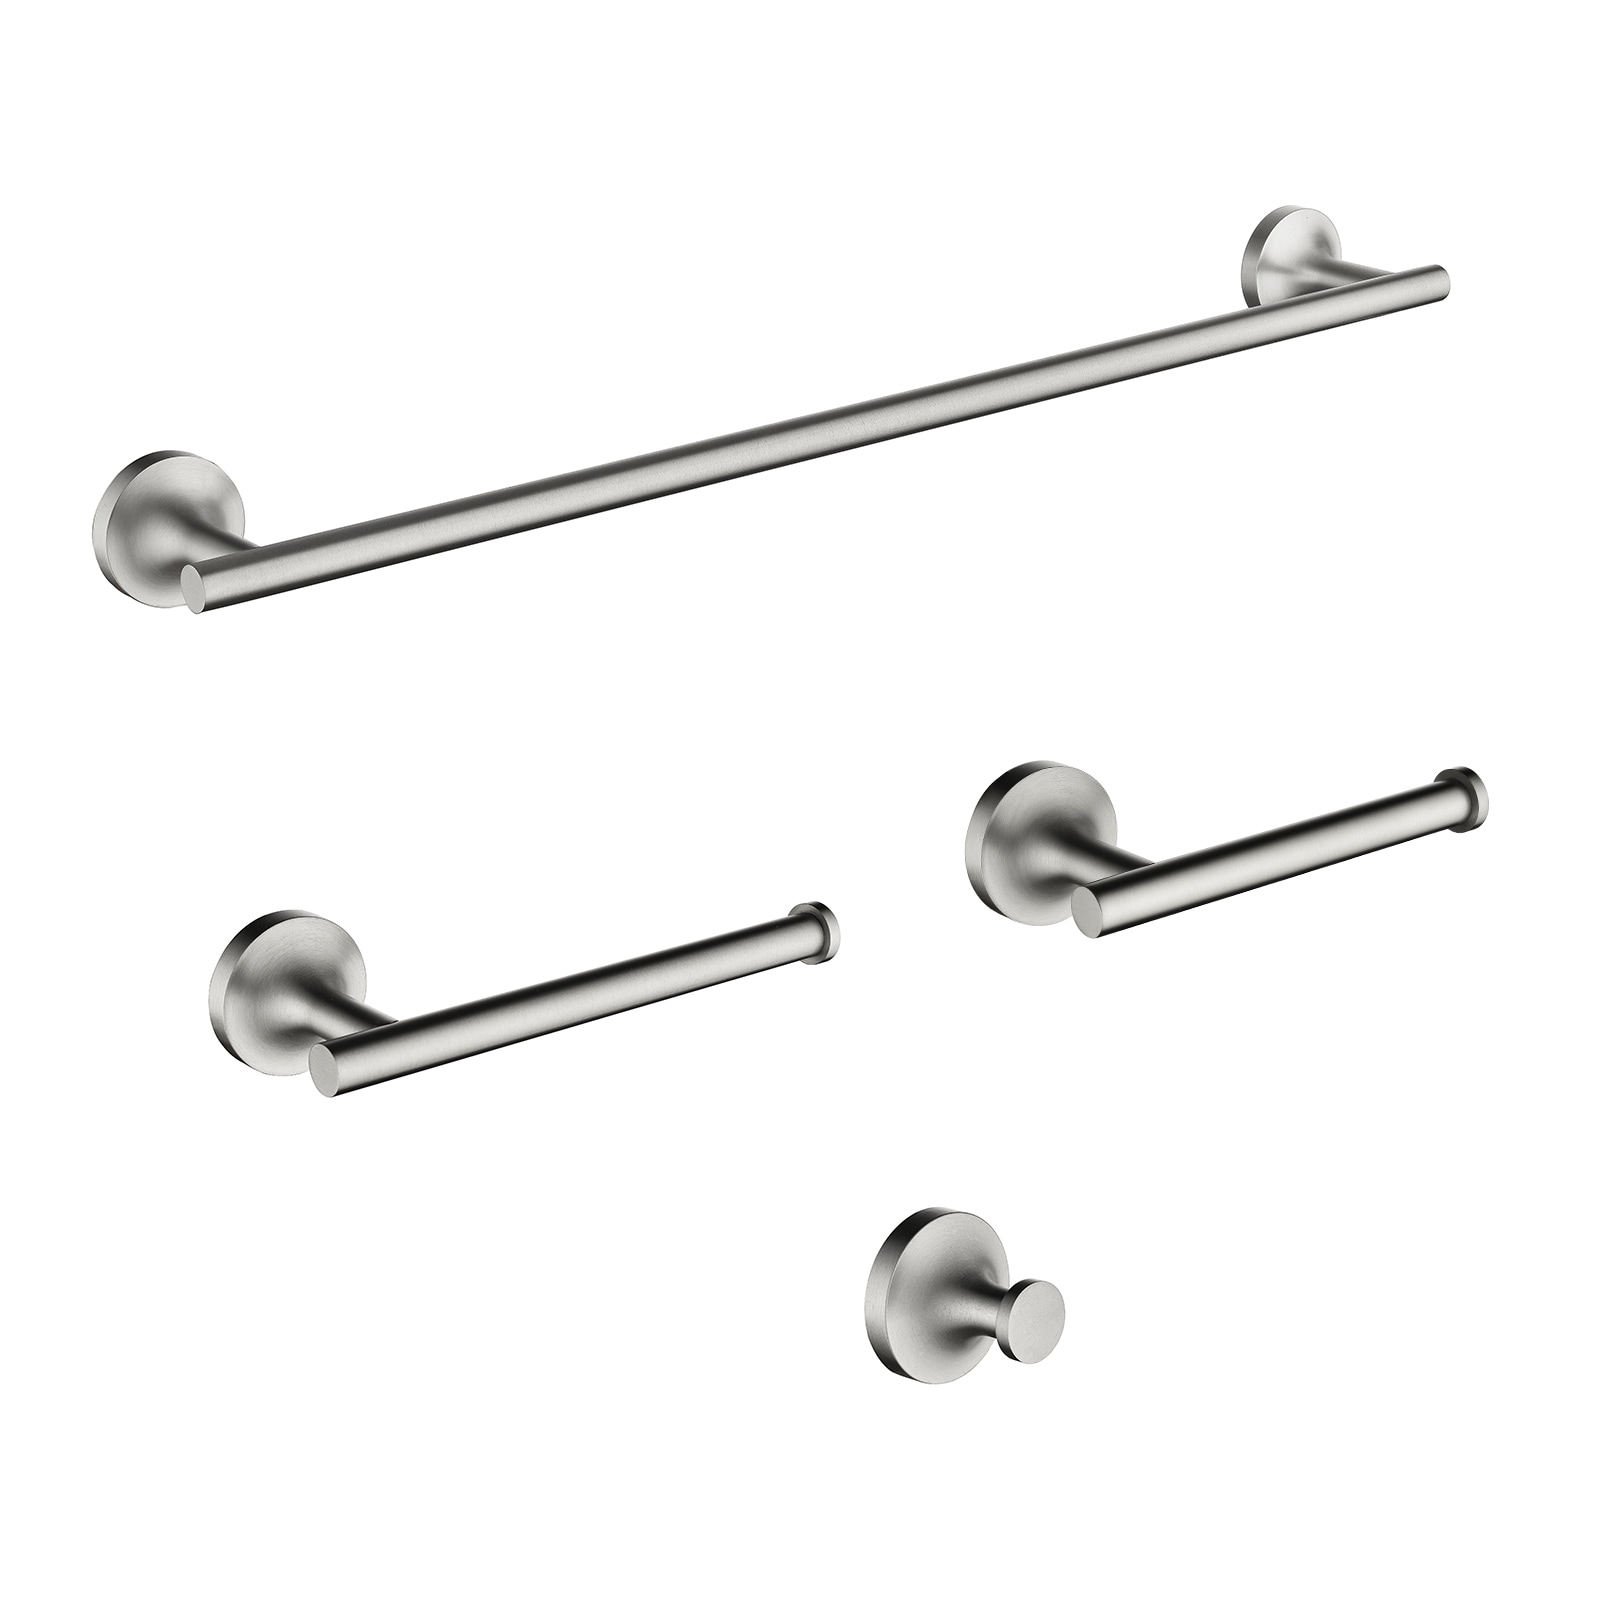 Brushed 4-Piece Bathroom Hardware Set Premium Stainless Steel Bath Towel  Bar Sets Wall Mounted Square Bathroom Accessories Kit, 23.6 Inch Brushed  Nickel 